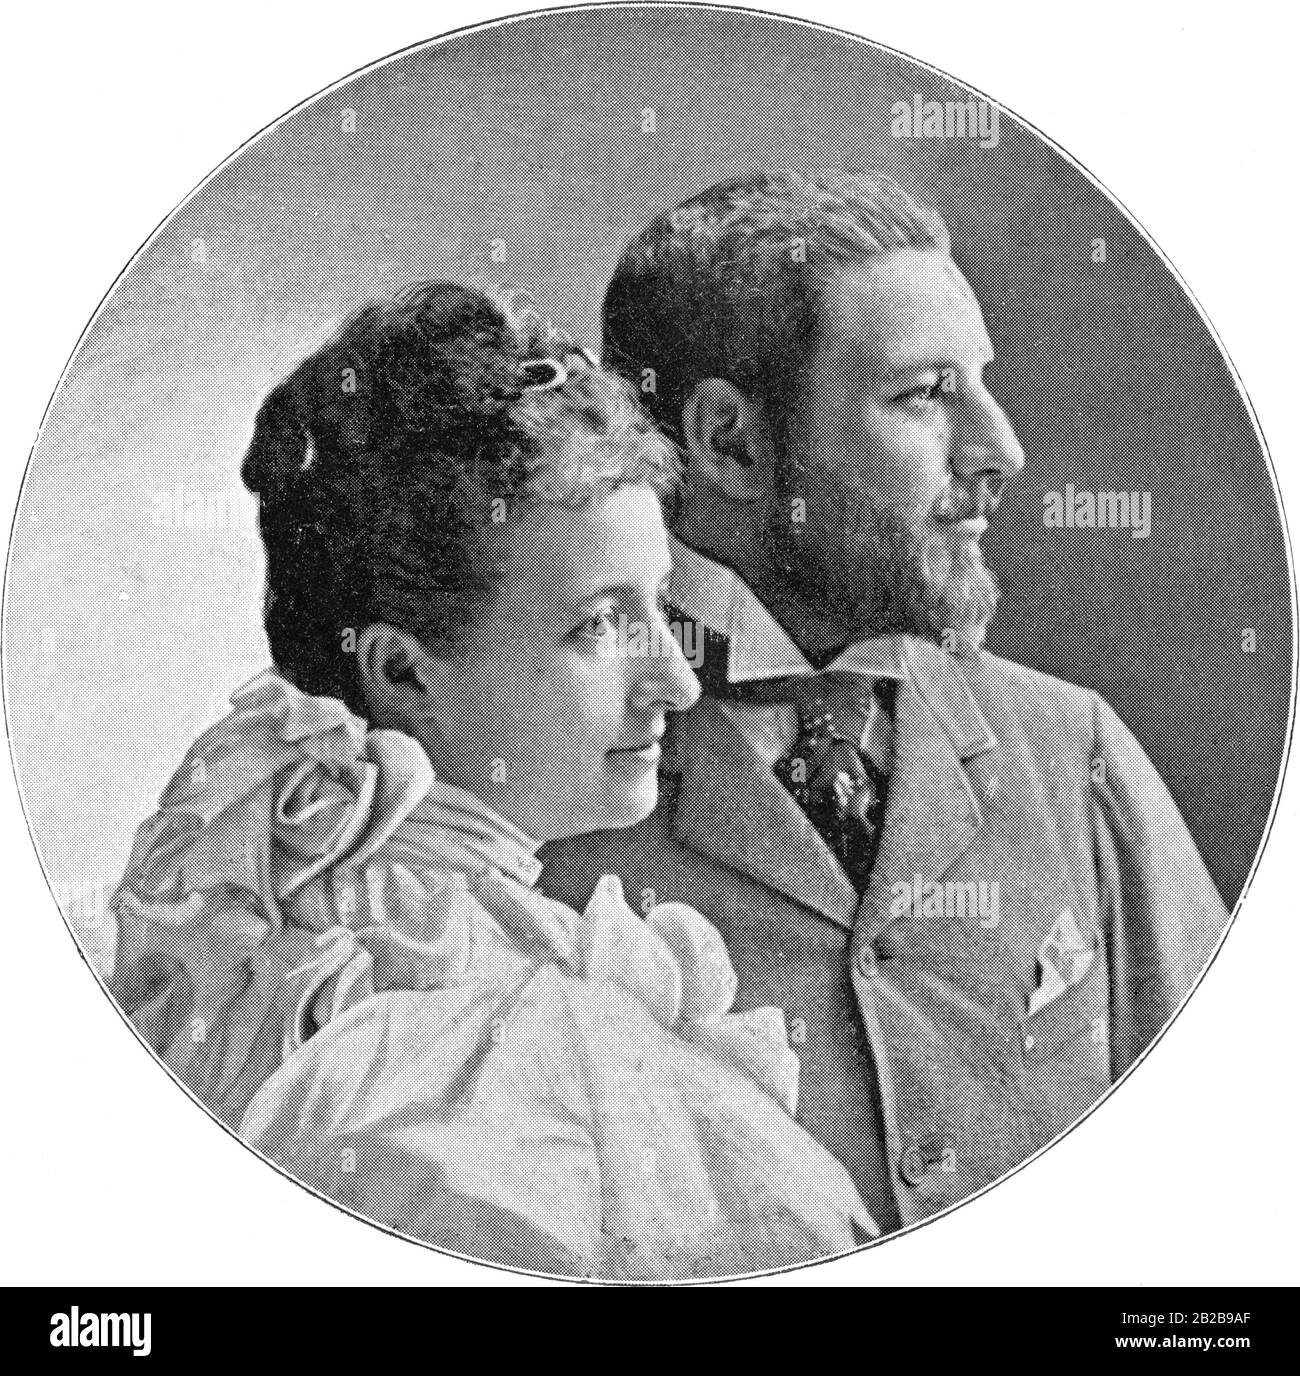 Portrait of the couple von Orleans. Archduchess Maria Dorothea Amalie of Austria was a member of the Hungarian line of the House of Habsburg-Lorraine and was the great-granddaughter of Leopold II of Austria. In 1896 she married her second cousin from the House of Orleans, Duke Louis Philippe Robert d'Orleans, the pretender to the French throne. The marriage went childless and the couple separated in 1914. Stock Photo